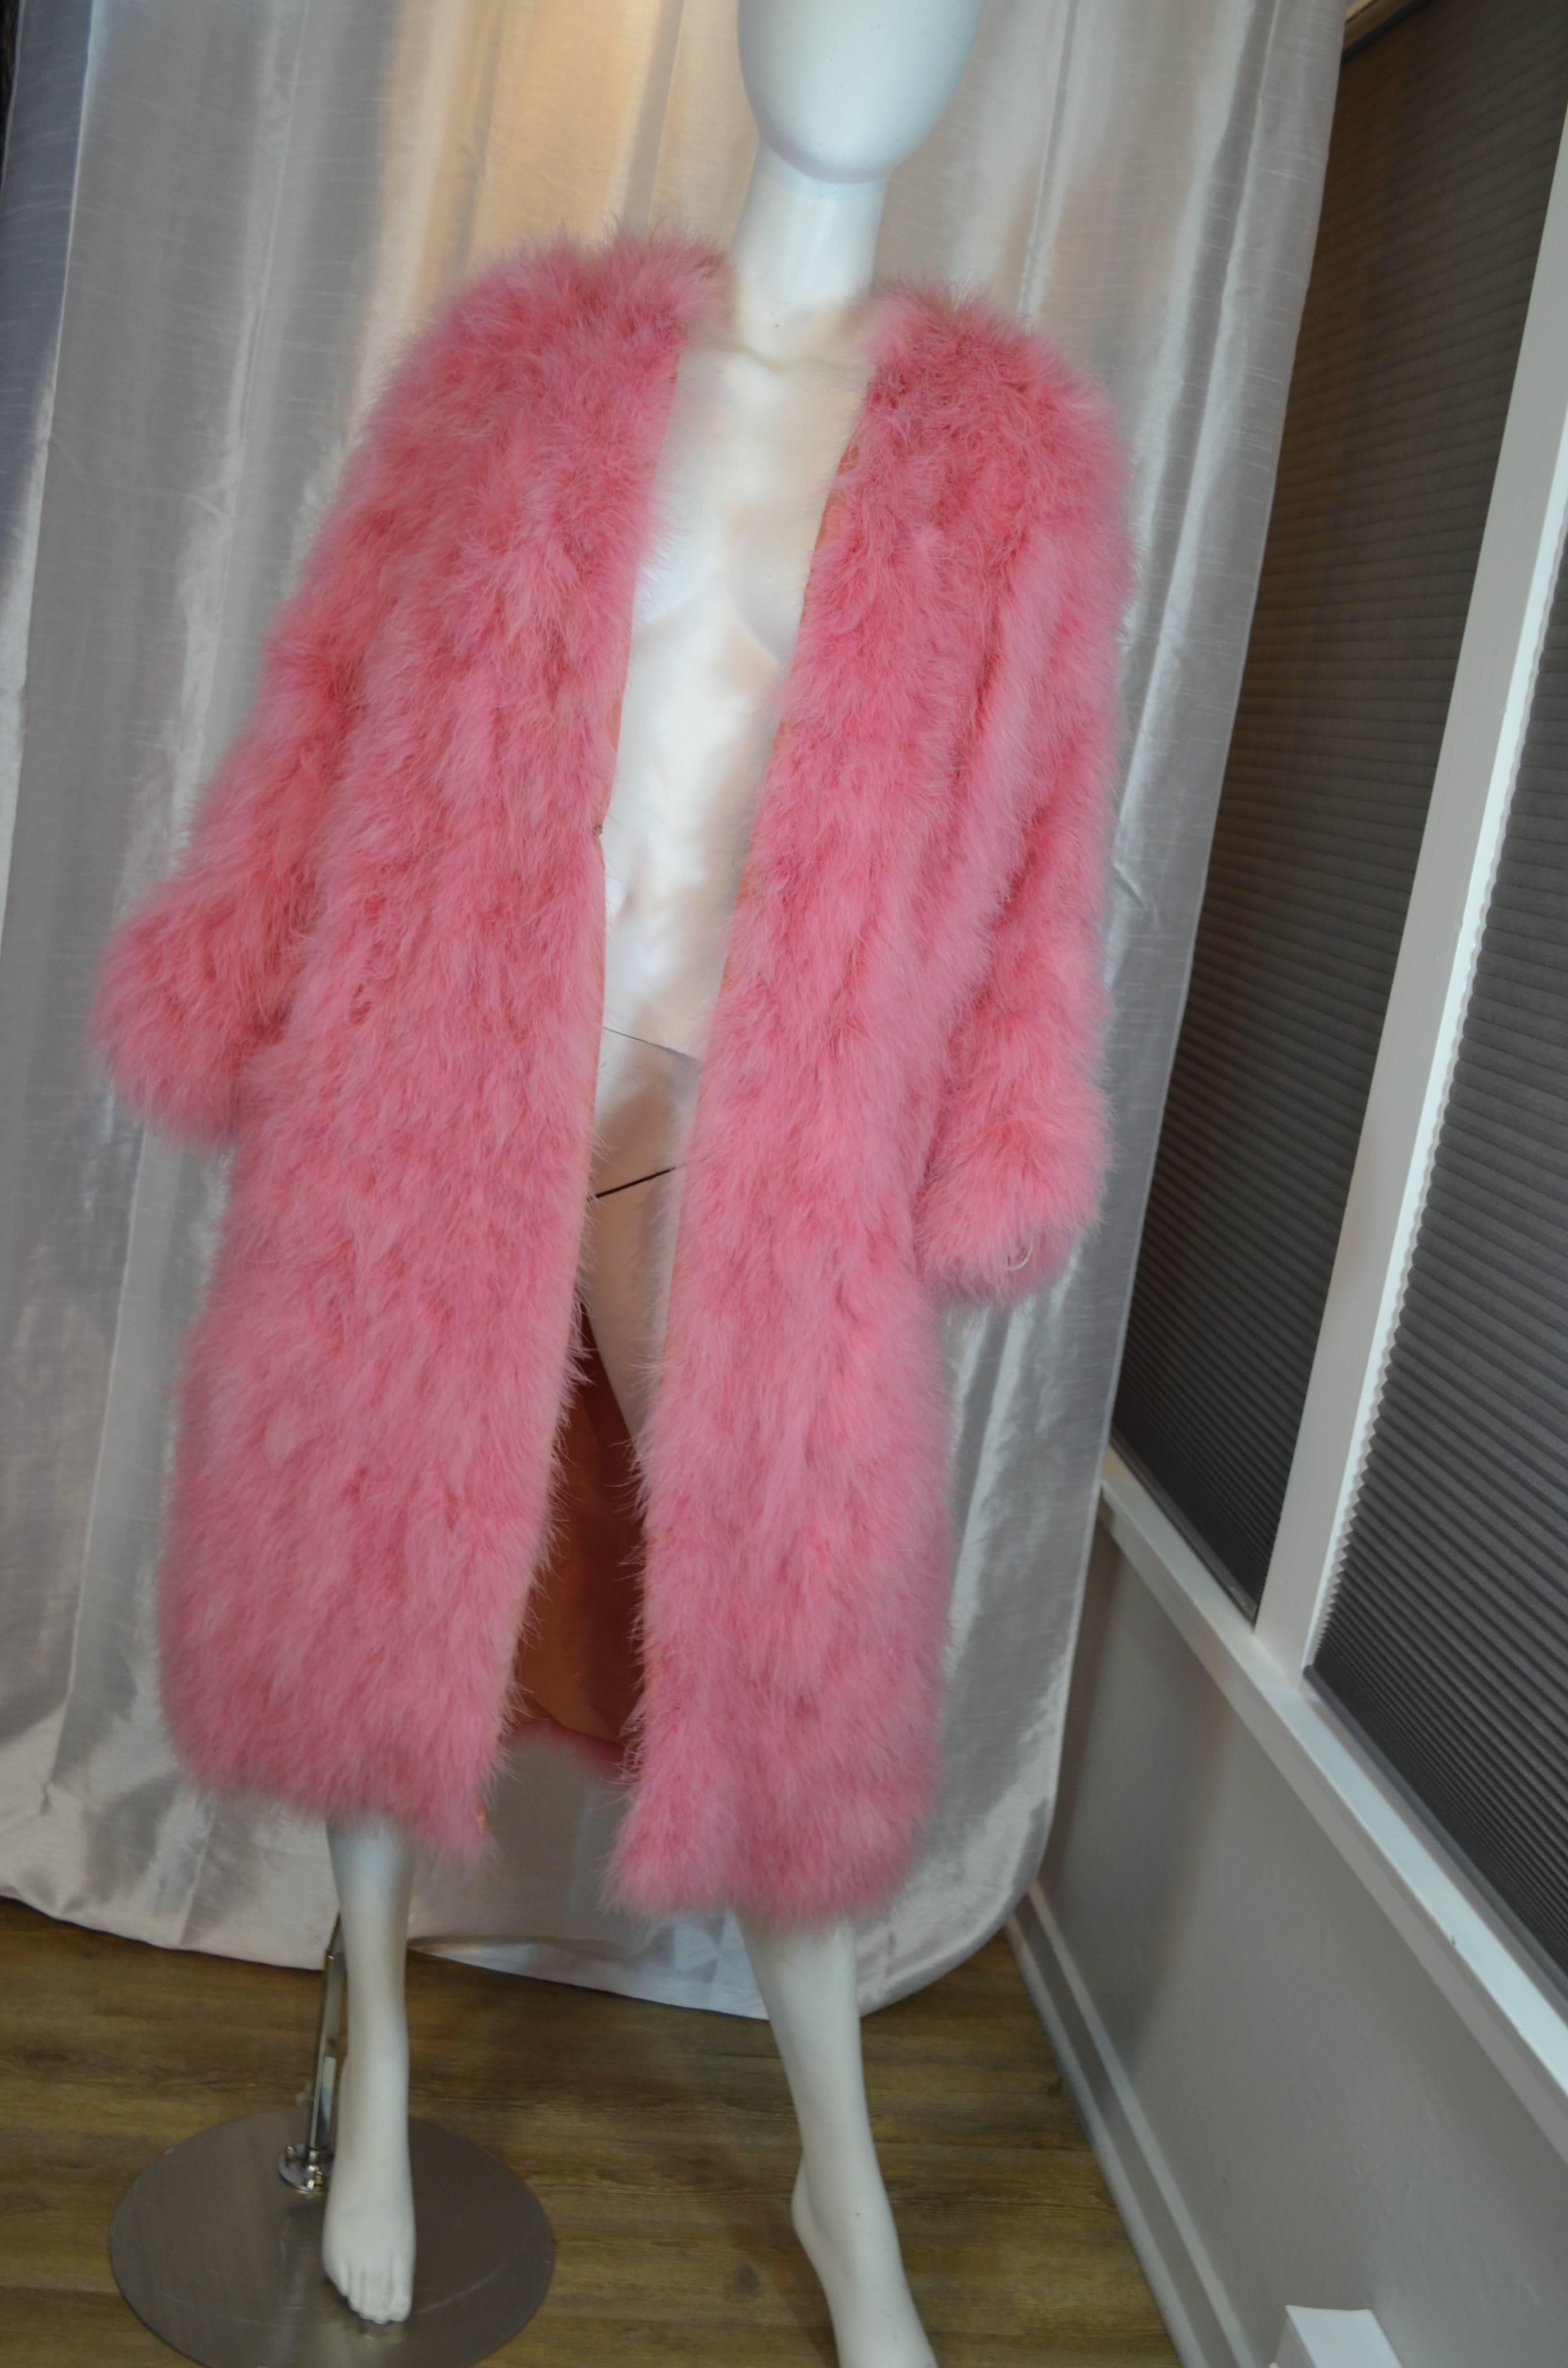 Vicky Valere Parisian designed Maribou Turkey Feather Coat sold by Giorgio Beverly Hills. Pink feather outer coat is lined in matching pink rayon. Collarless with pink hook and eye closures down the front. French size medium. Excellent vintage